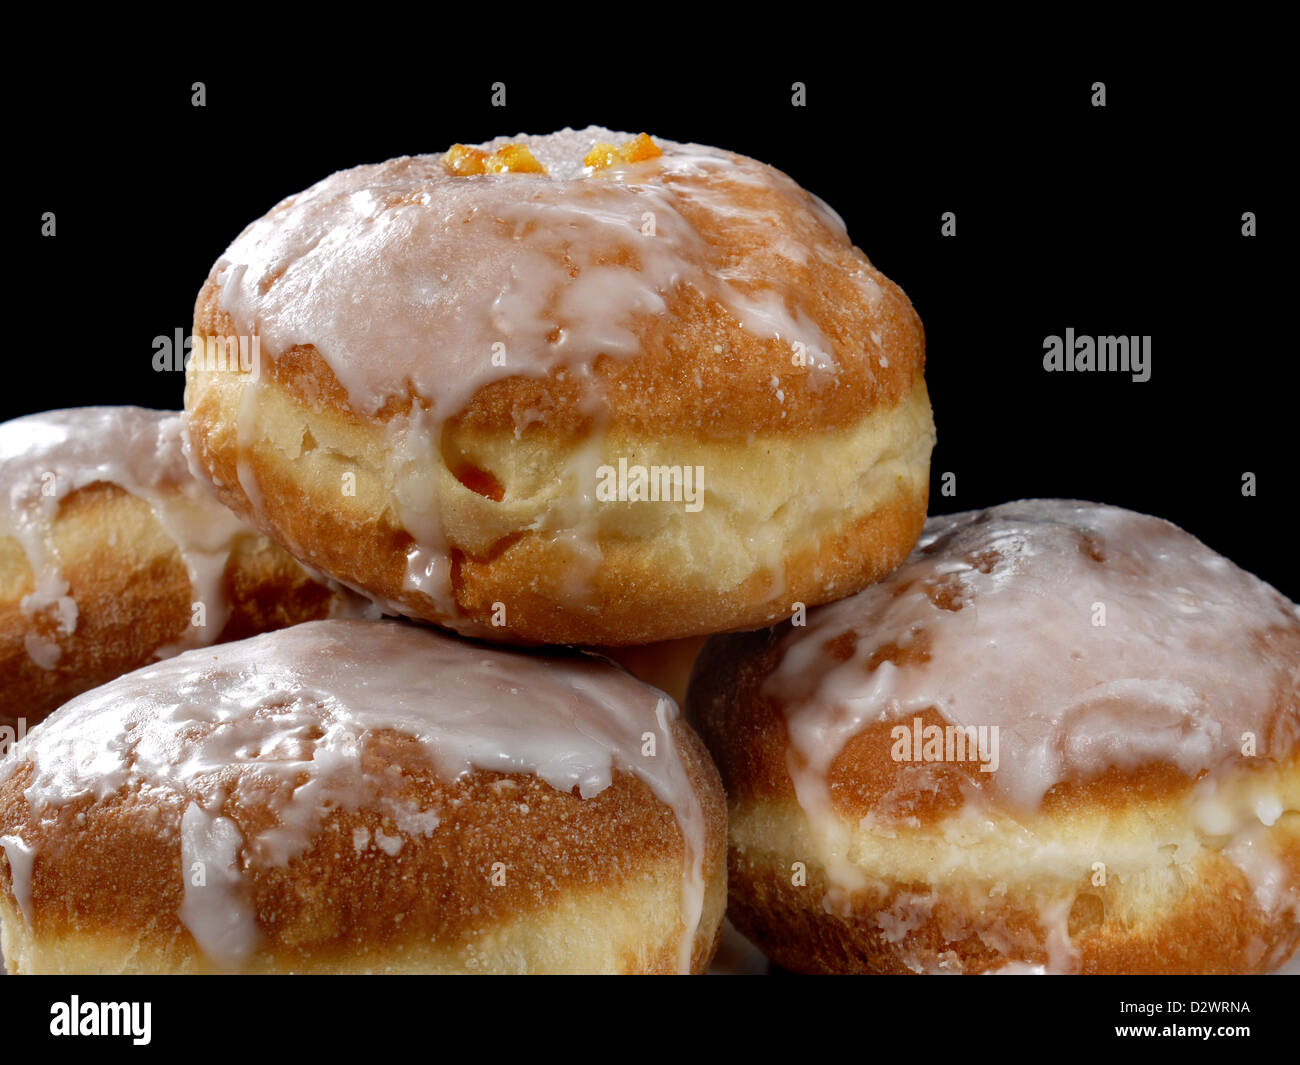 Polish donuts with icing over black background Stock Photo